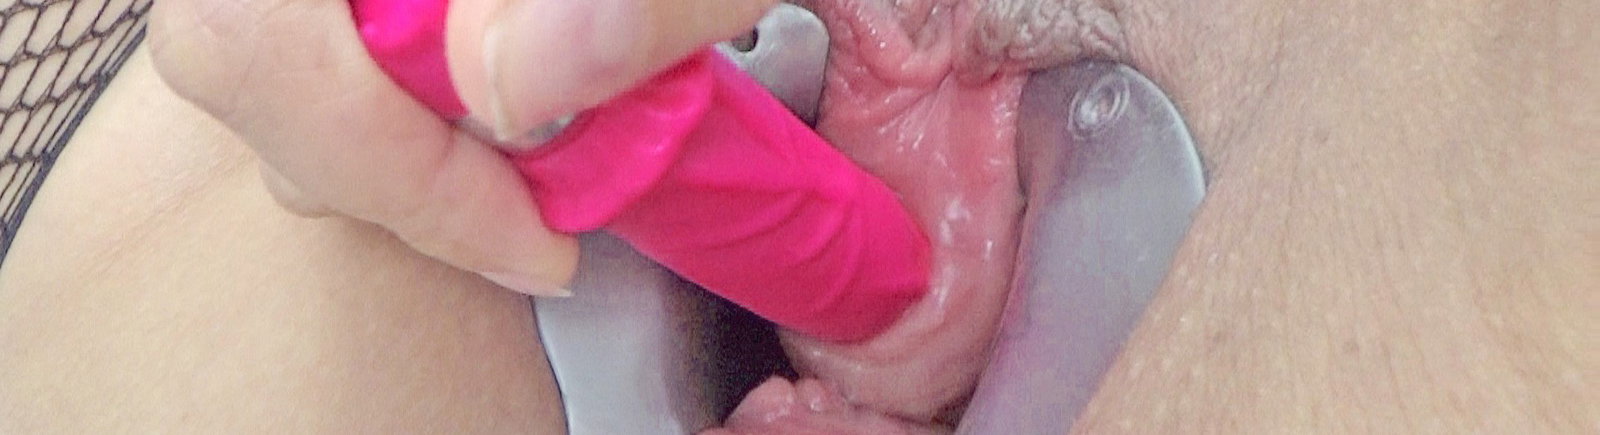 Photo by Extreme Porn Videos with the username @extremepornvideos,  October 28, 2019 at 9:06 AM and the text says '#peehole #sounding #pisshole #dildo #extreme #probe #sound https://www.videoshorny.com'